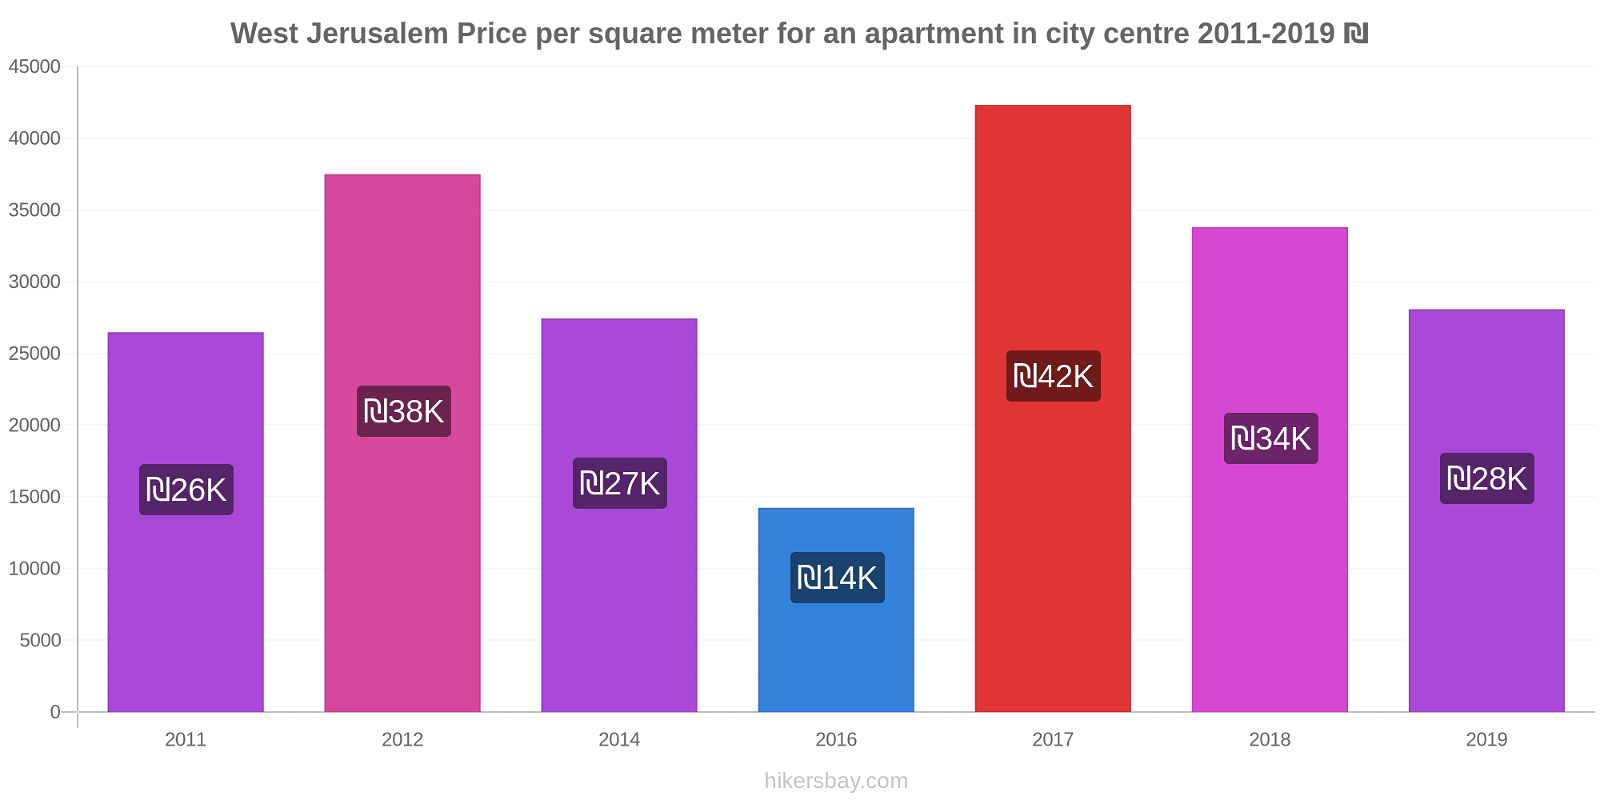 West Jerusalem price changes Price per square meter for an apartment in city centre hikersbay.com